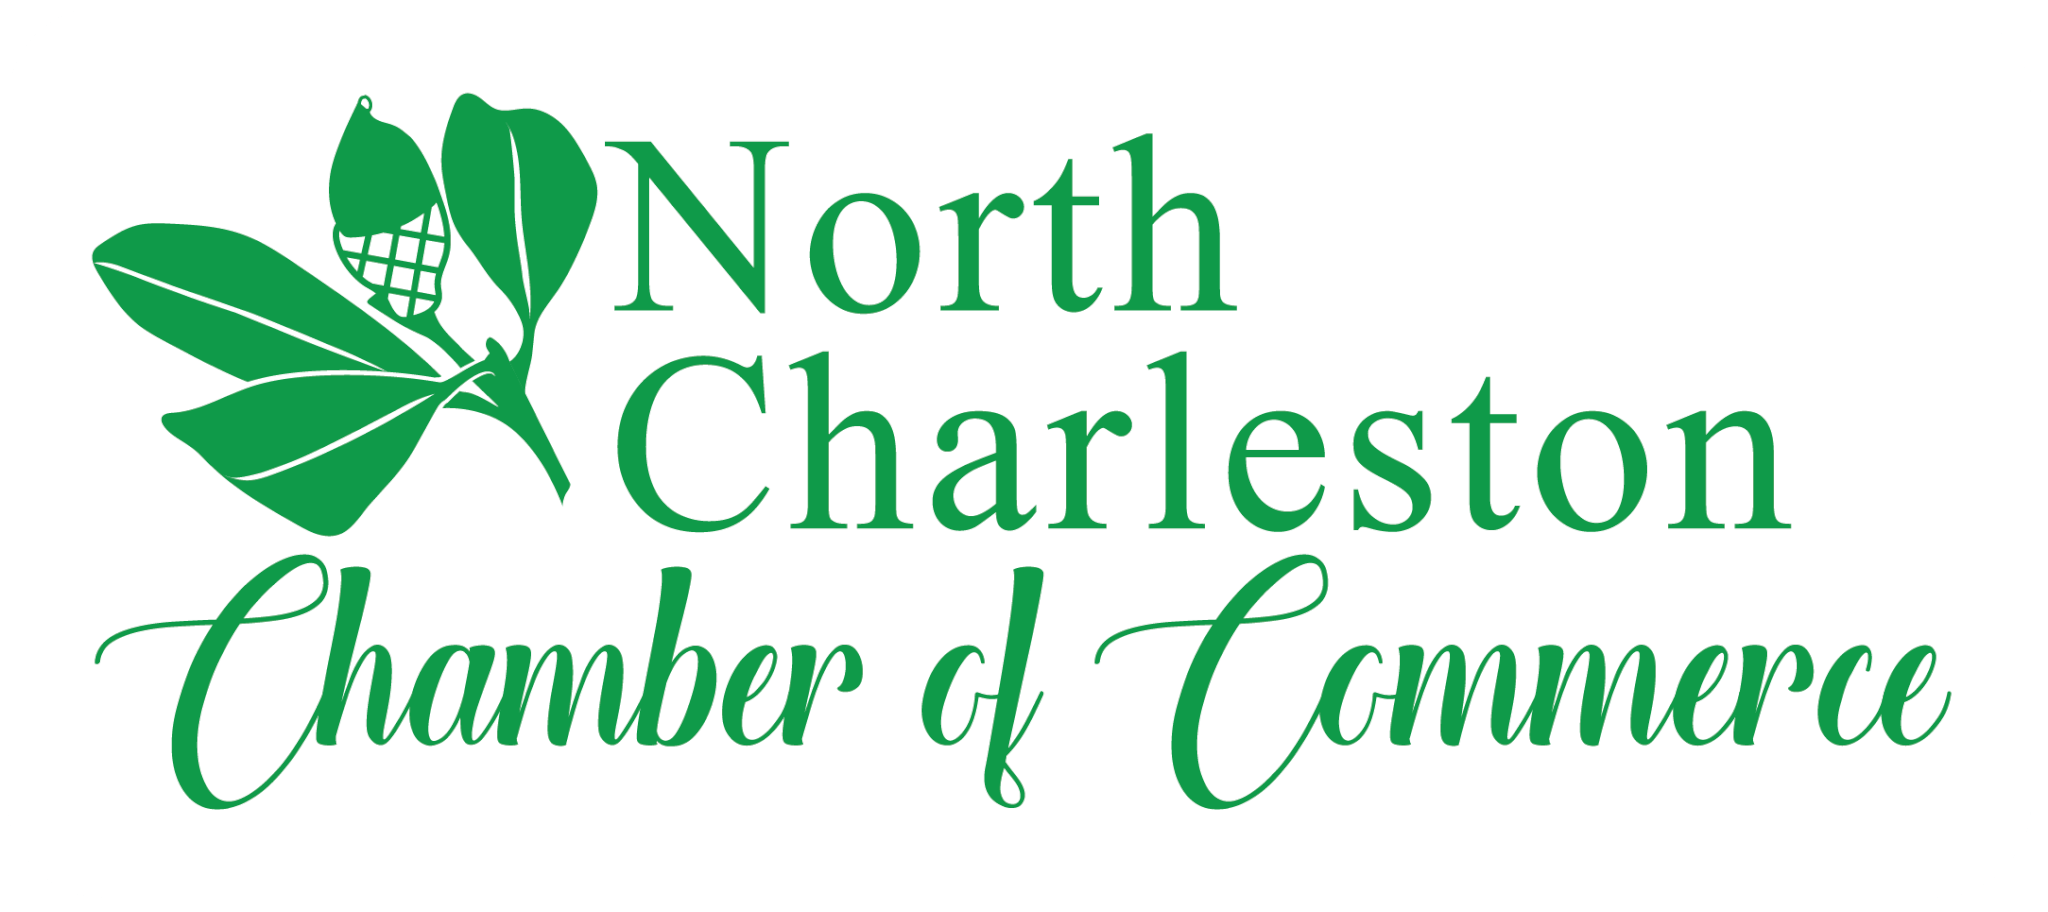 Meet the Sponsors of the North Charleston Chamber of Commerce